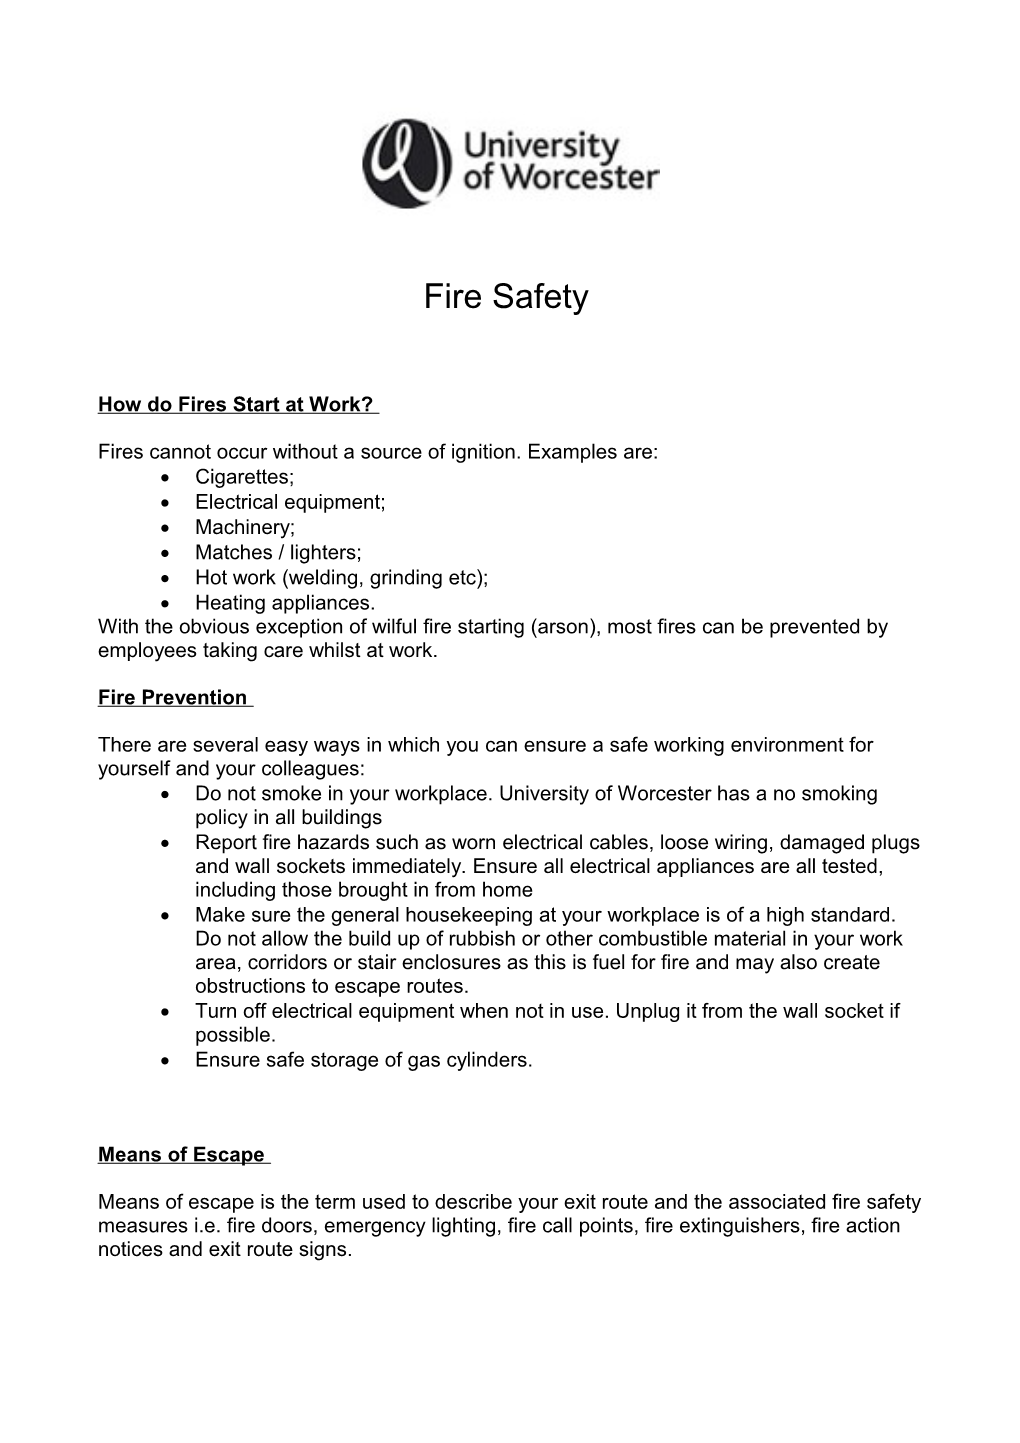 Fire Safety for Staff